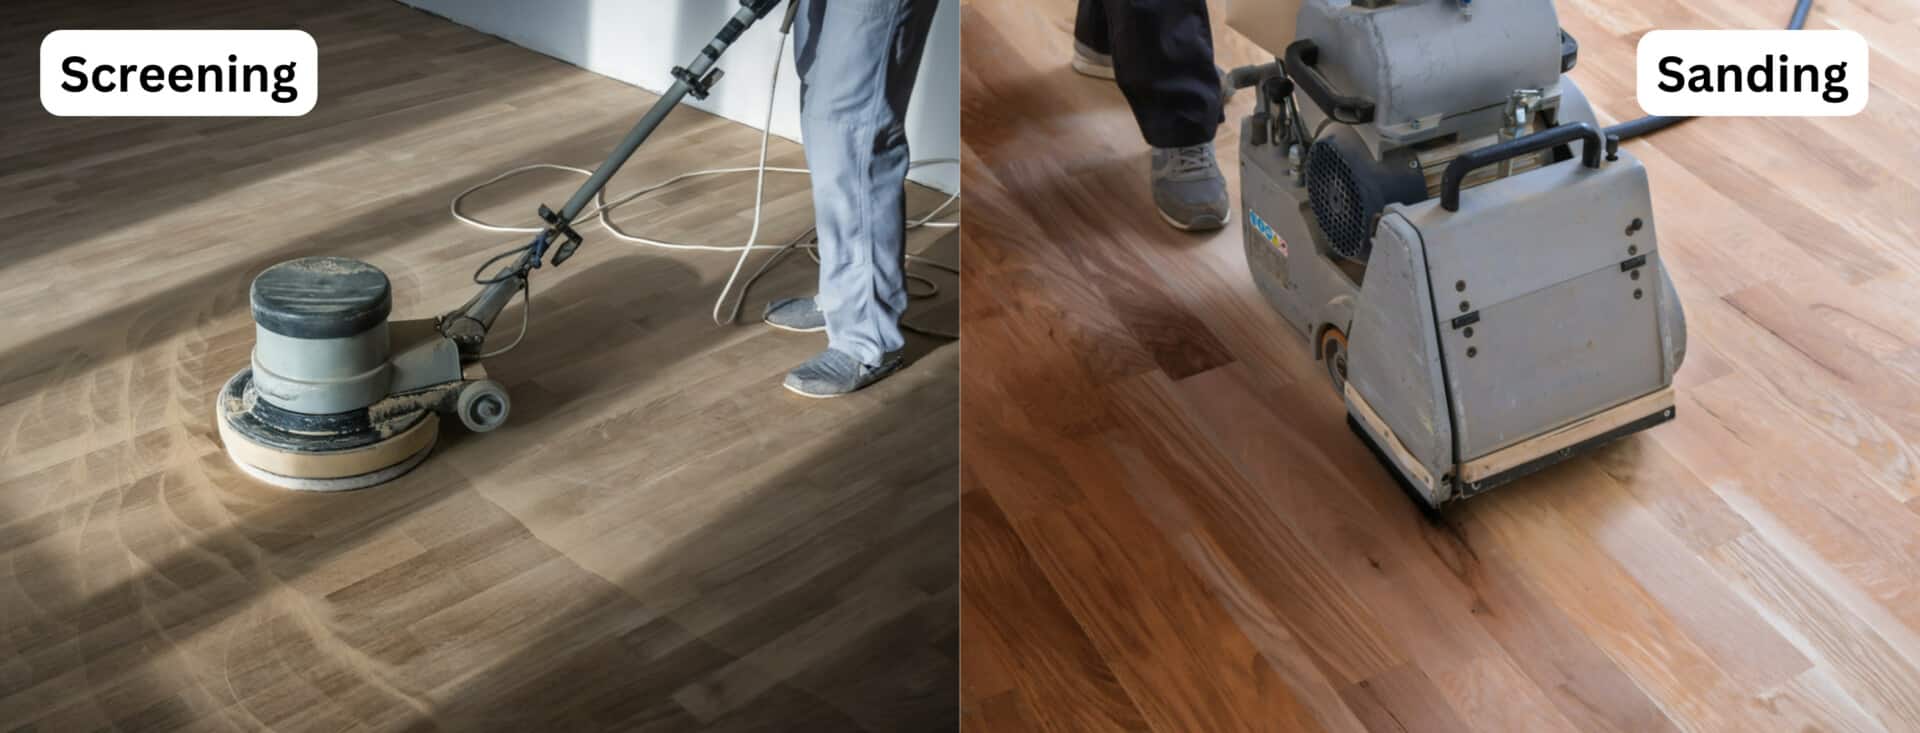 Comparison of floor maintenance techniques with a buffer machine for screening and a belt sander for sanding.